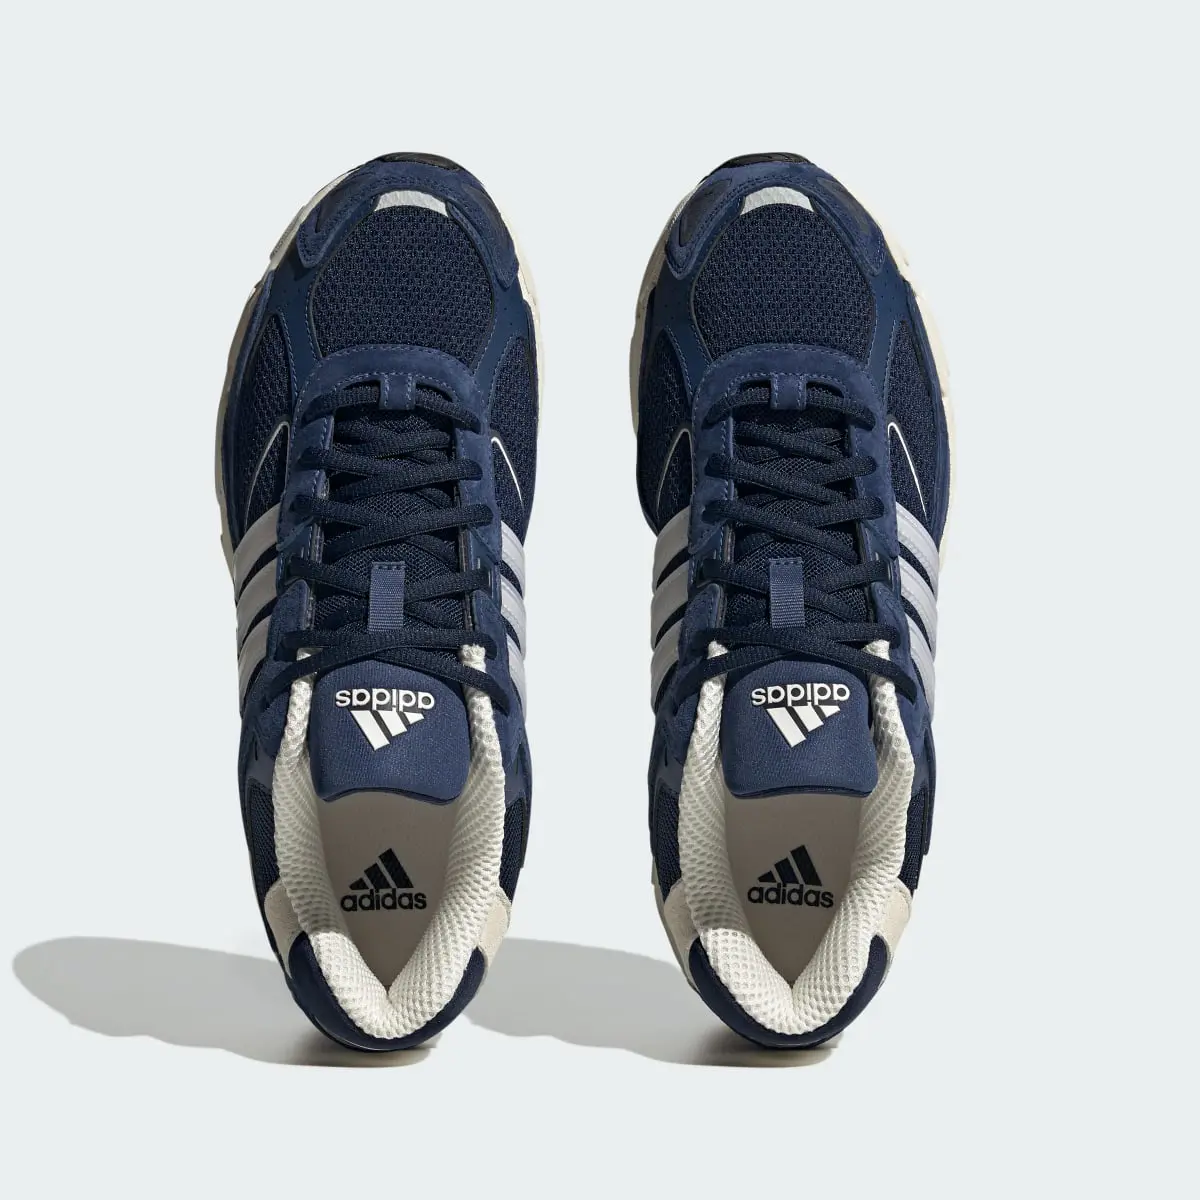 Adidas Response CL Shoes. 3